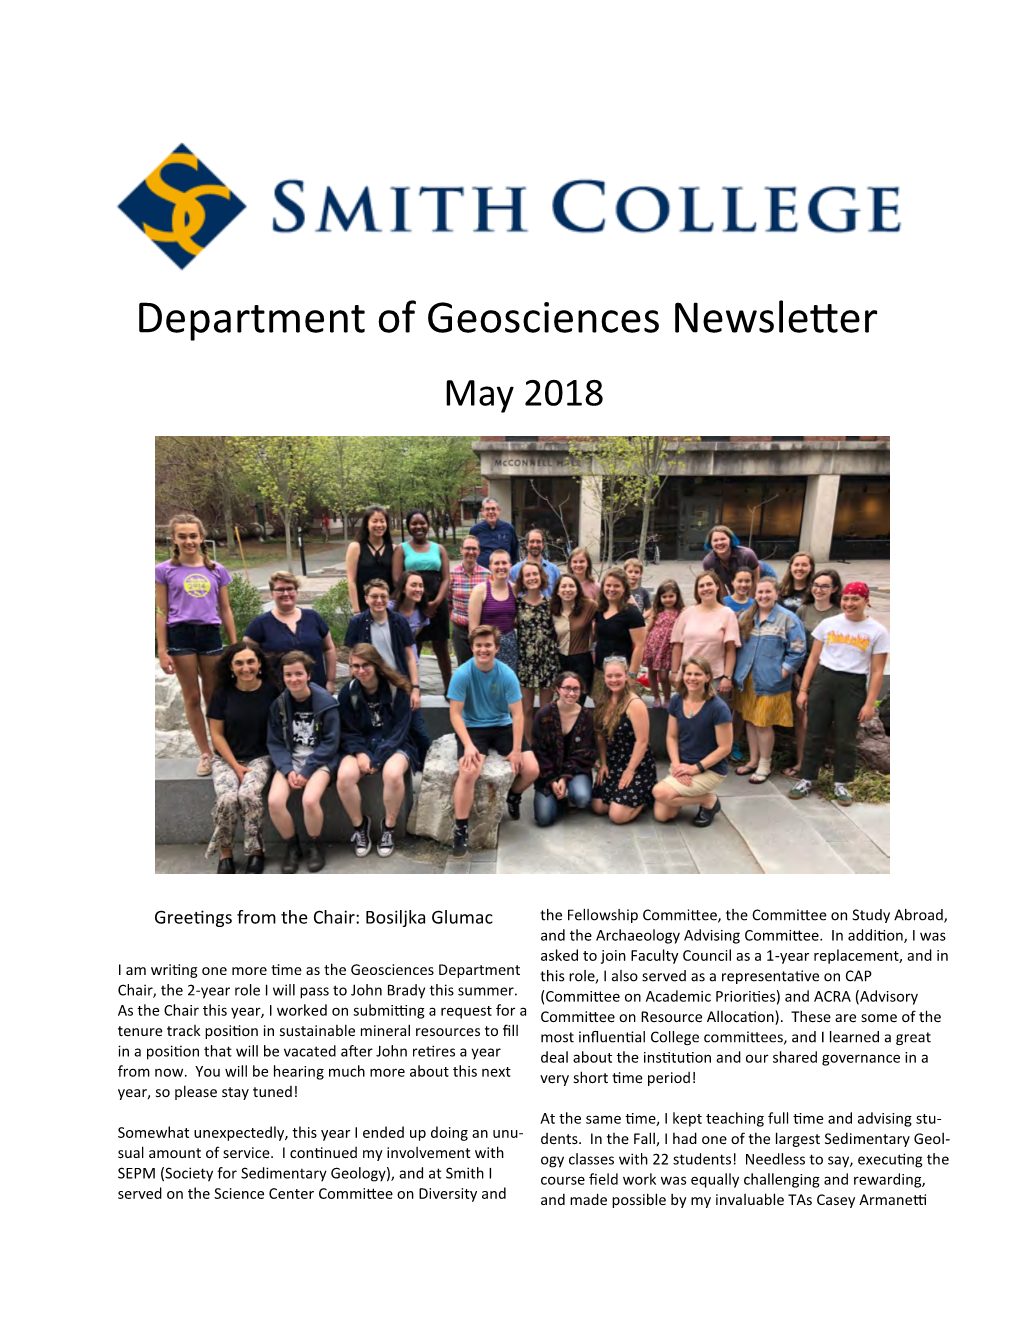 Department of Geosciences Newsletter May 2018